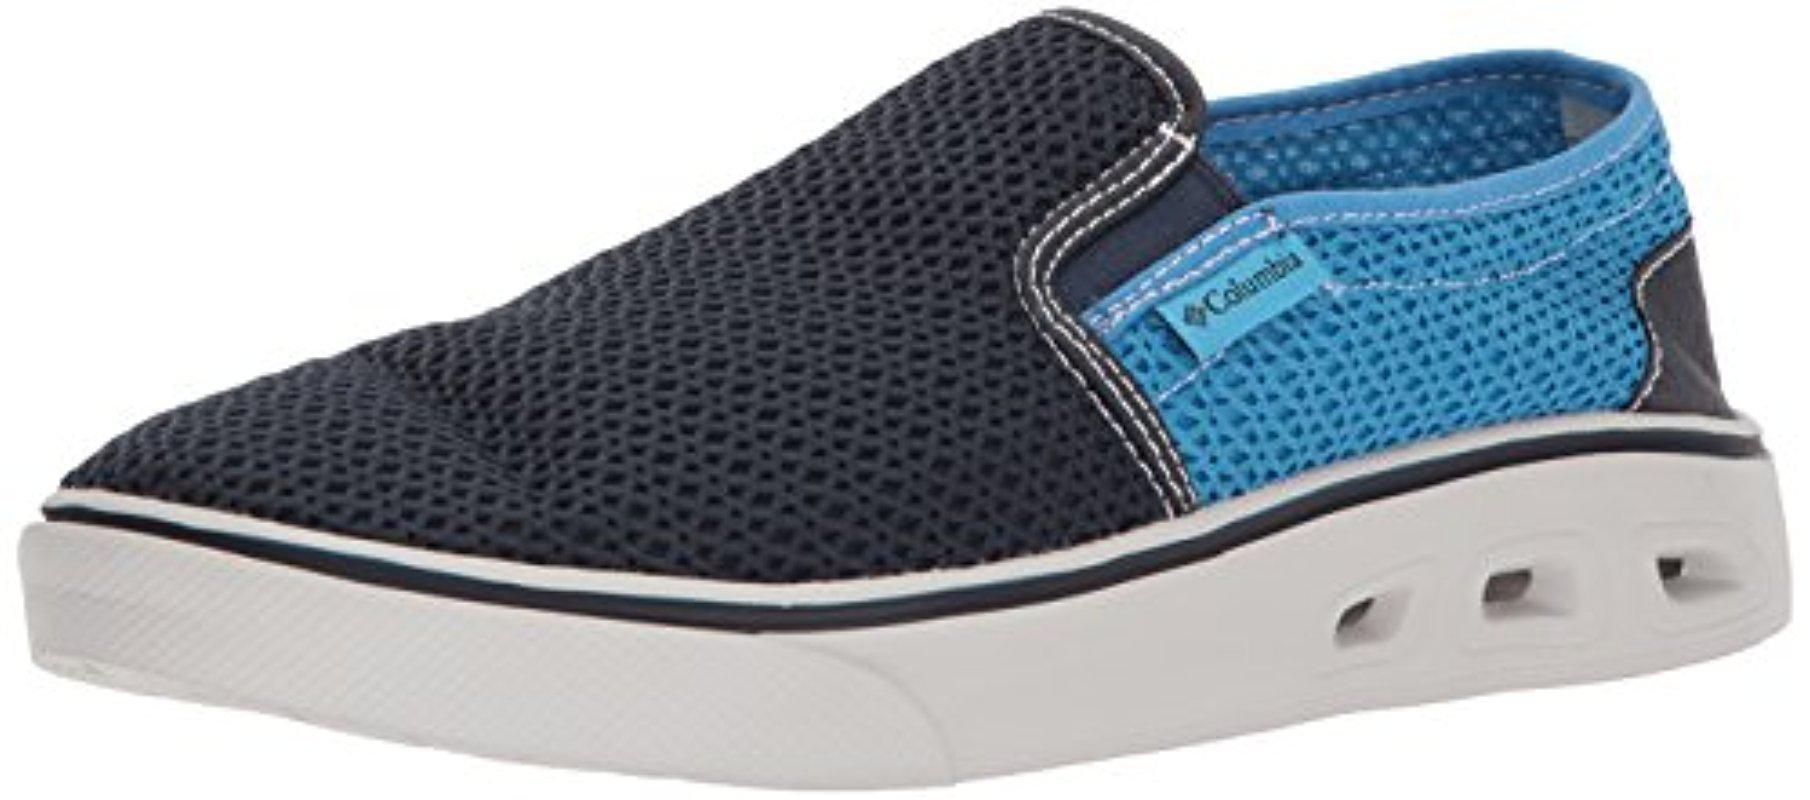 columbia men's spinner vent casual shoes